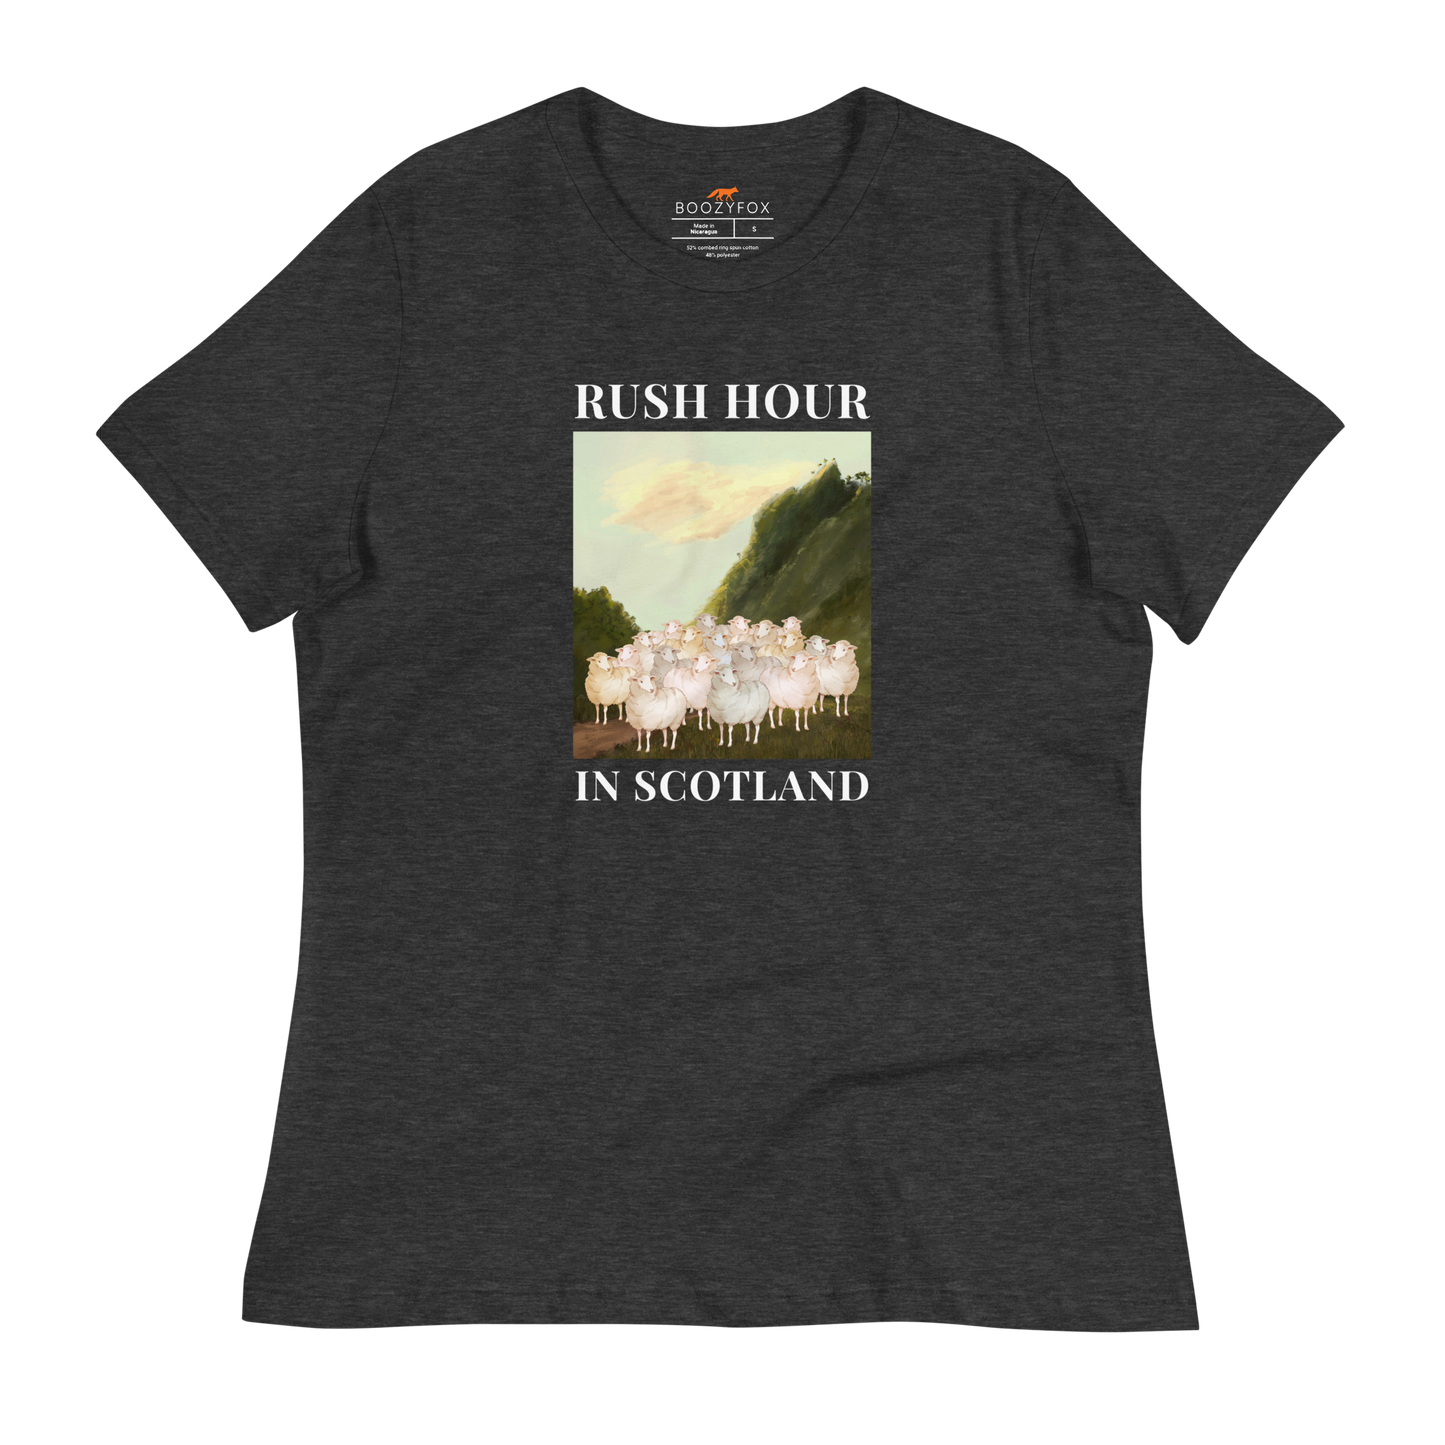 Women's Relaxed Dark Grey Heather Sheep T-Shirt featuring a comical Rush Hour In Scotland graphic on the chest - Artsy/Funny Graphic Sheep Tees - Boozy Fox